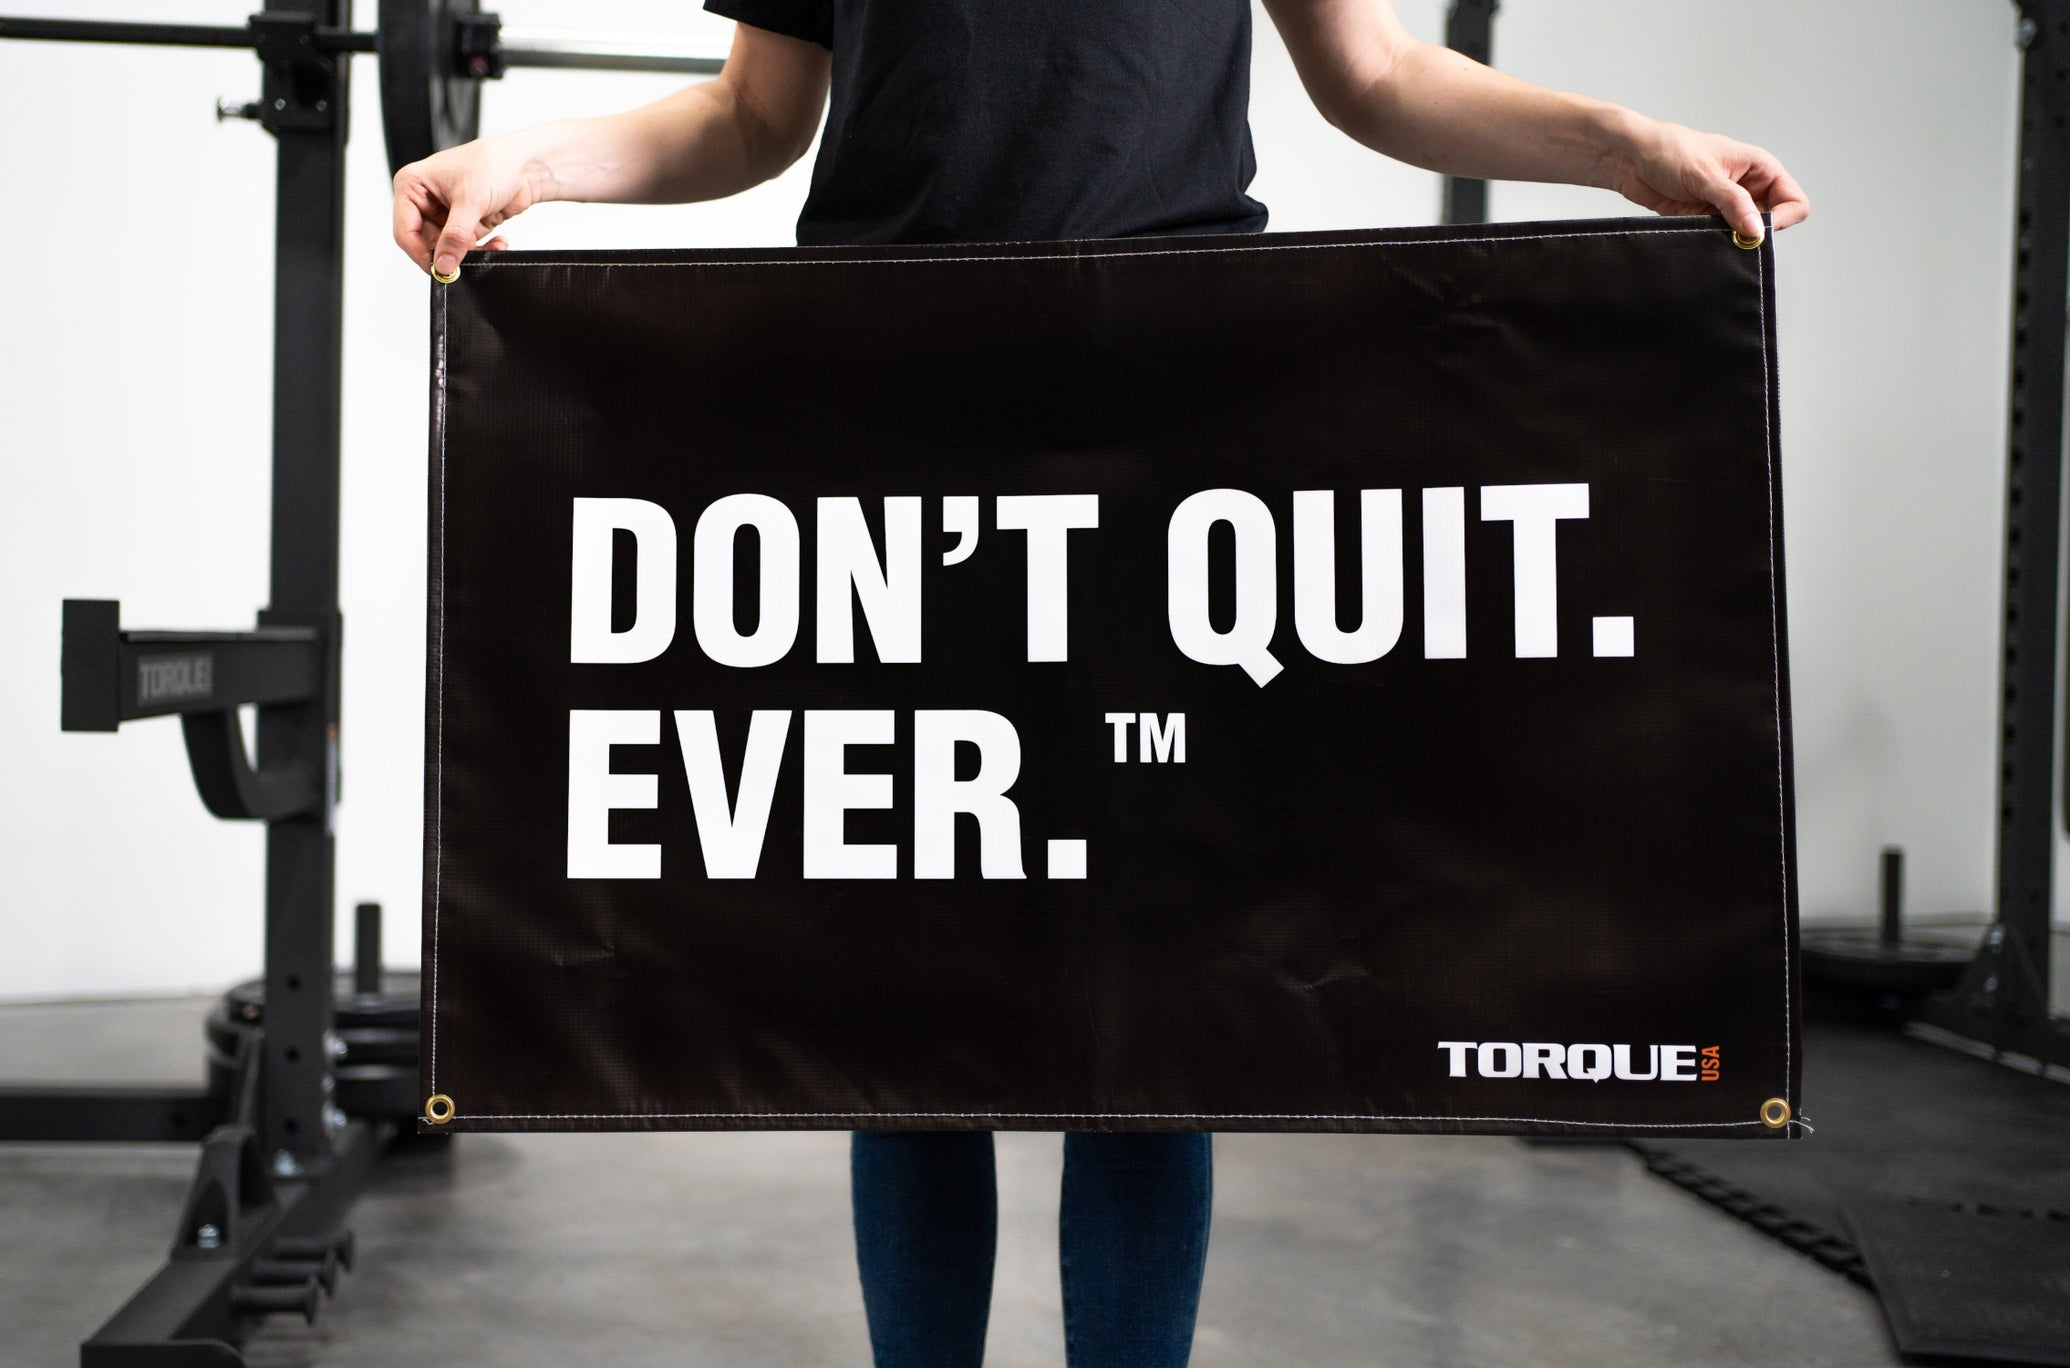 Torque Fitness Don't Quit. Ever. Inspirational Gym Banner